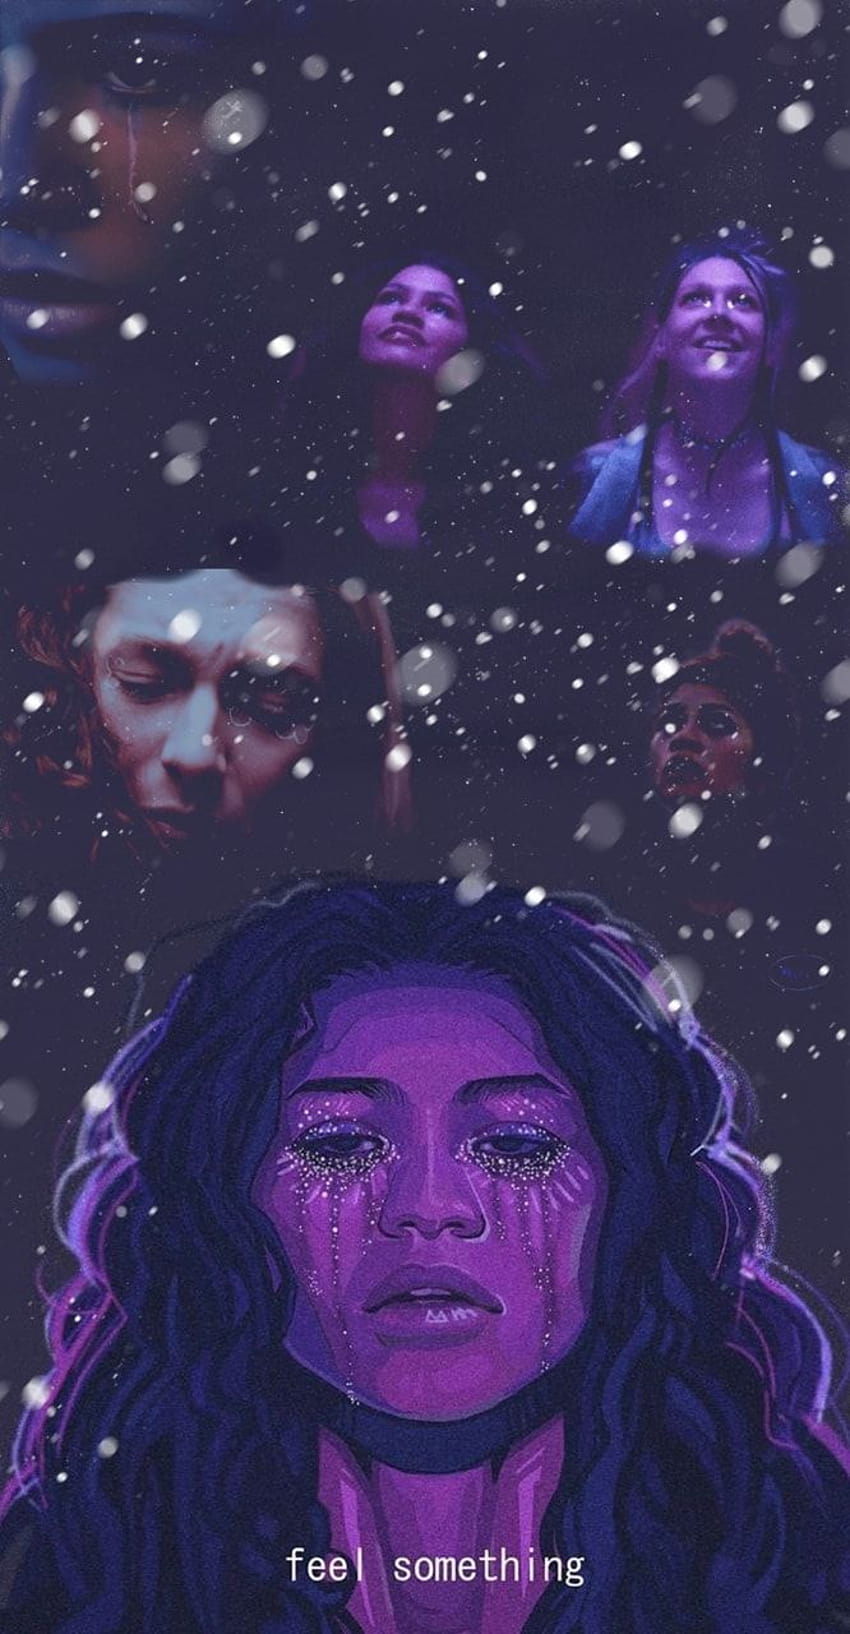 A poster of the movie, with snow falling - Euphoria